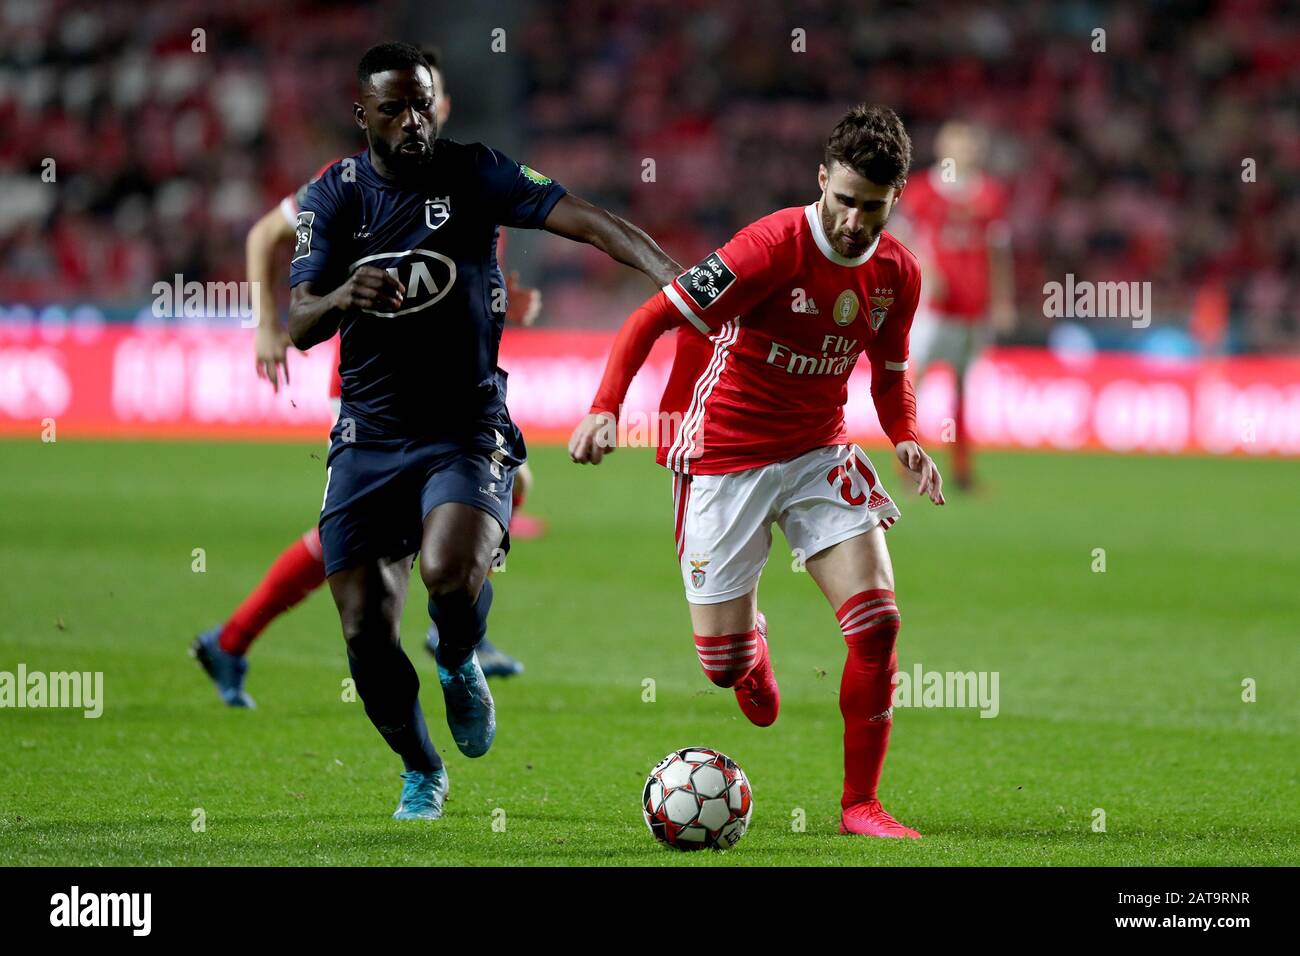 Lisbon. 31st Jan, 2020. Rafa Silva of SL Benfica (R) competes during the Portuguese League football match between SL Benfica and Belenenses SAD in Lisbon, Portugal on Jan. 31, 2020. Credit: Pedro Fiuza/Xinhua/Alamy Live News Stock Photo